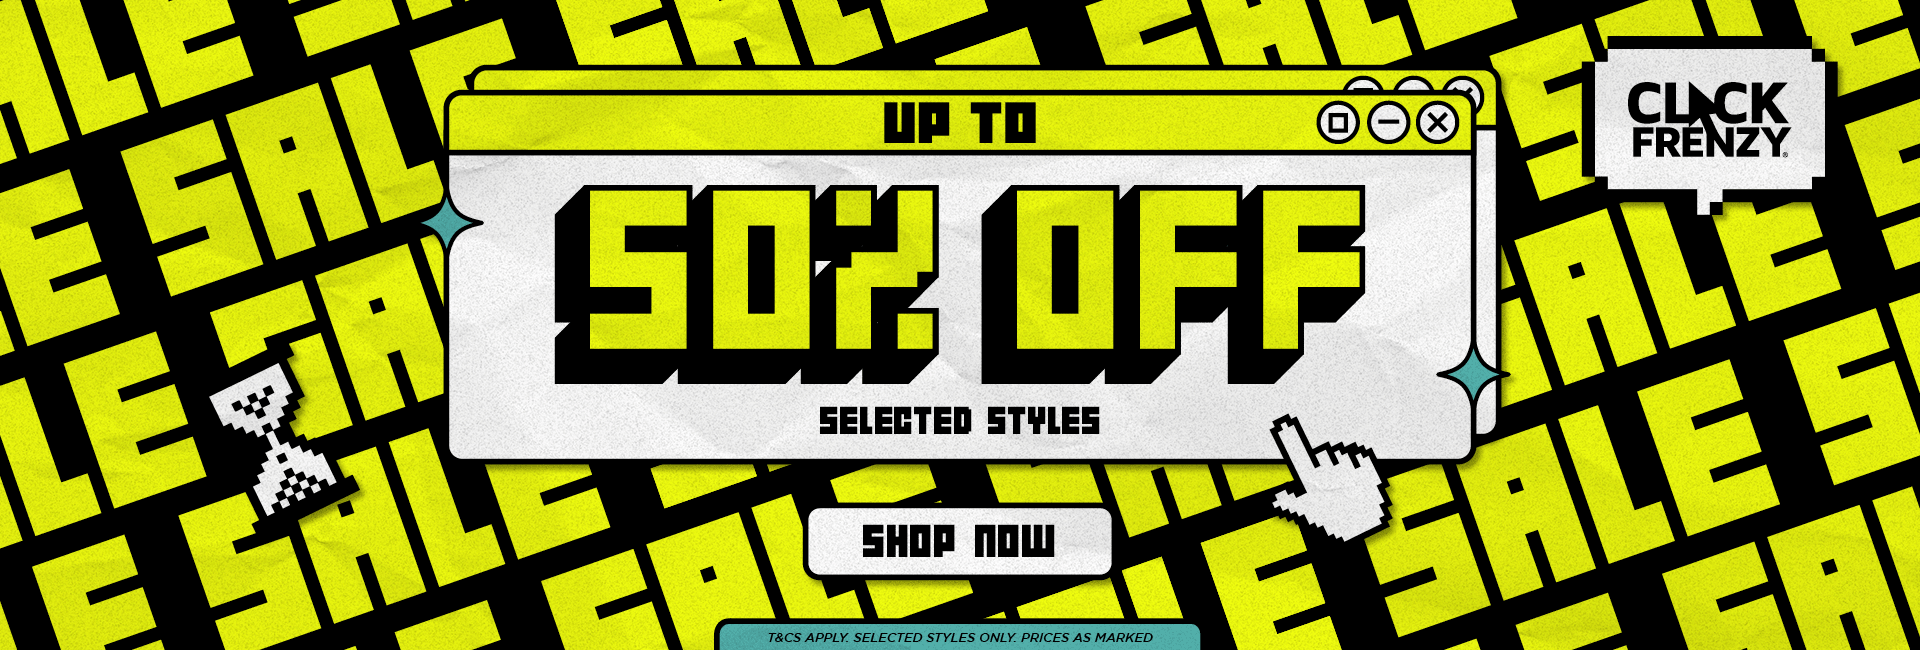 Click Frenzy sale Up to 50% OFF on selected styles